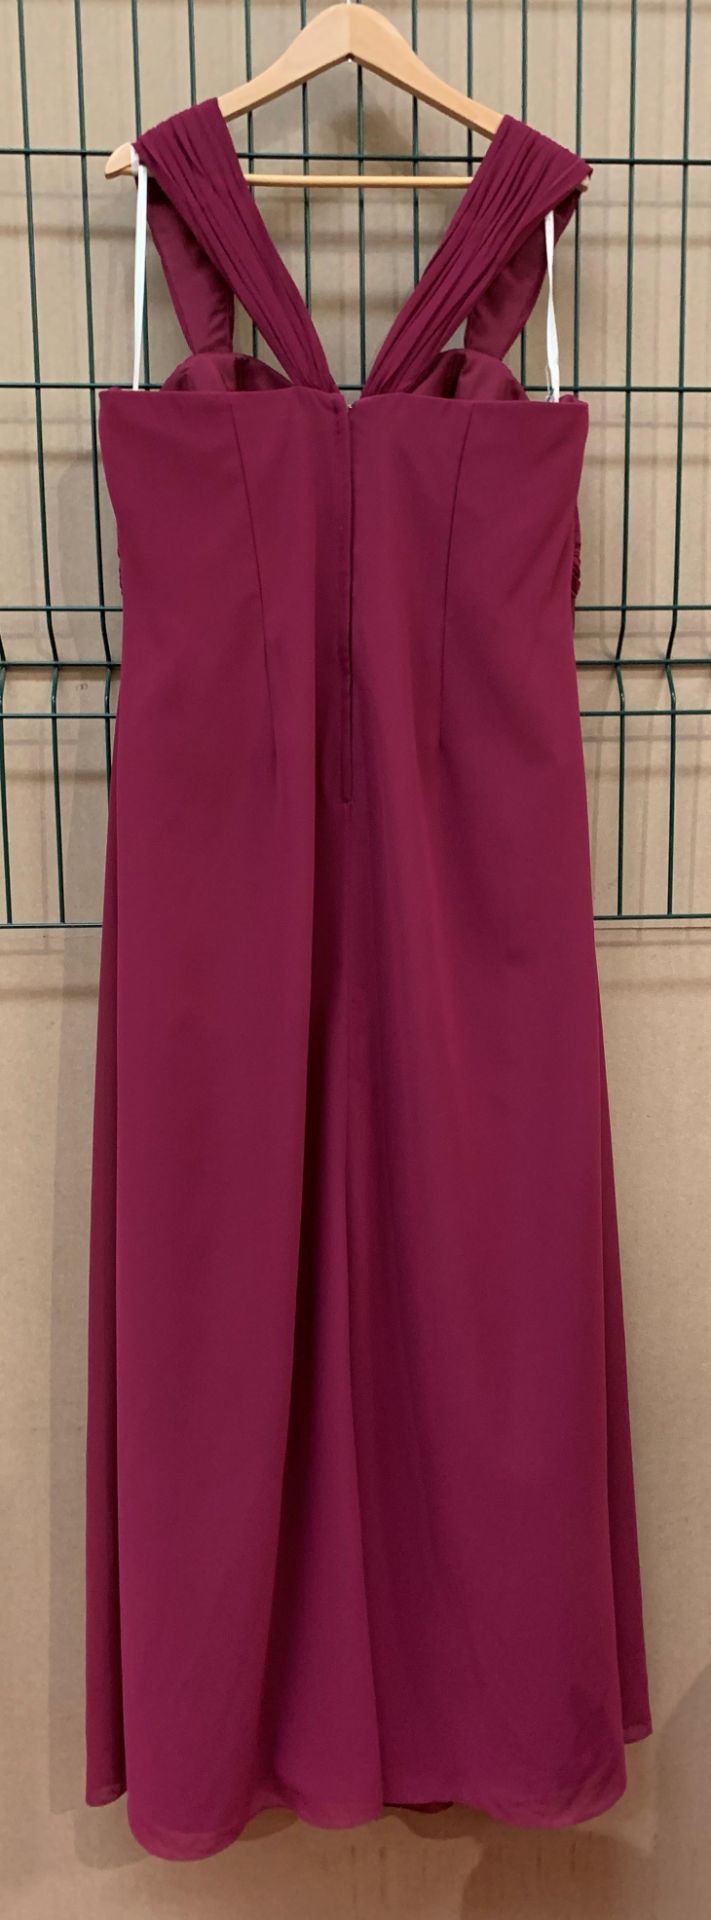 A bridesmaid/prom dress by Linzi Jay, Millie, burgundy, size 22, - Image 2 of 2